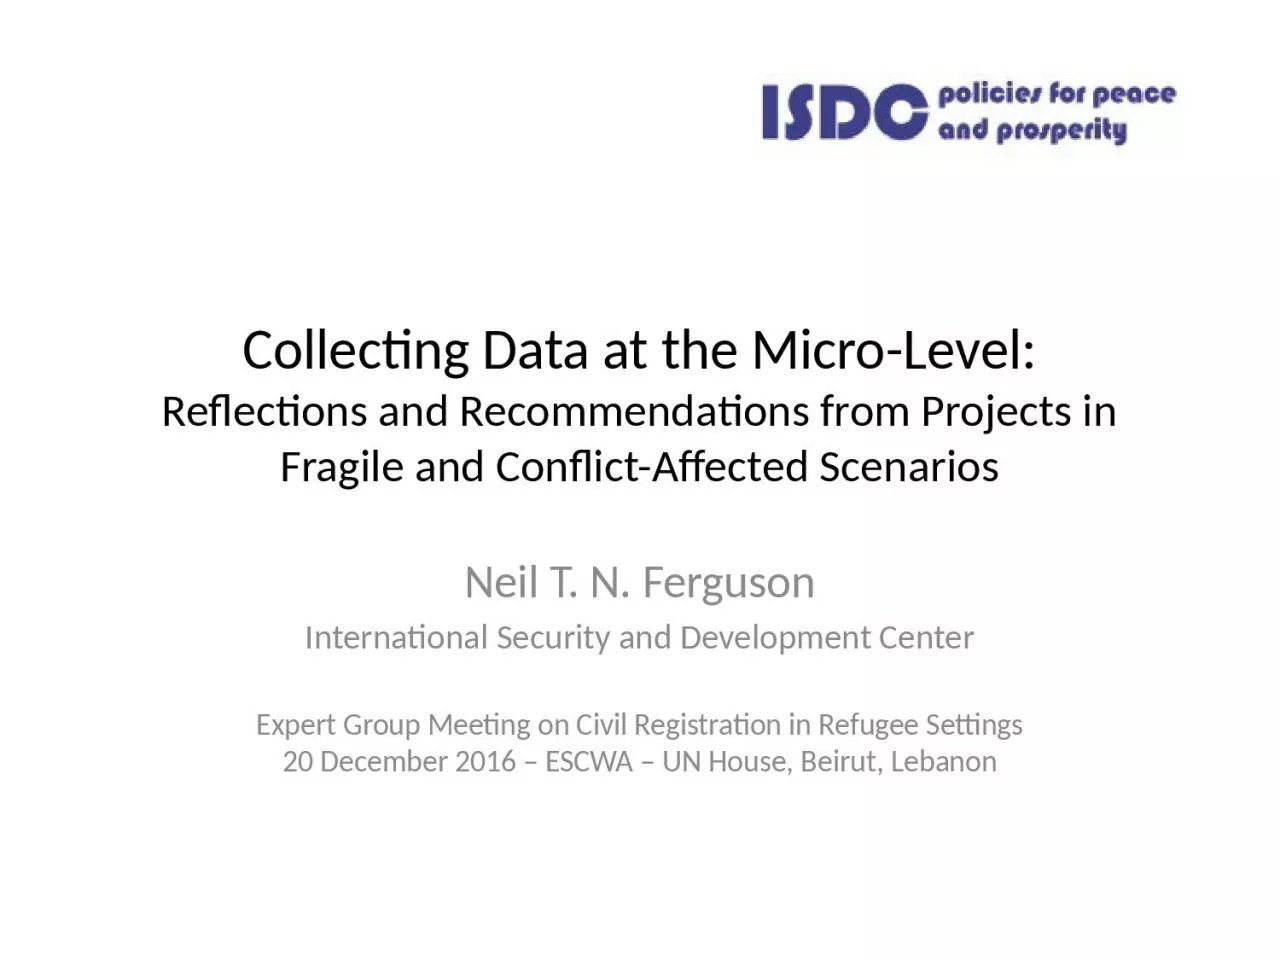 Collecting Data at the Micro-Level: